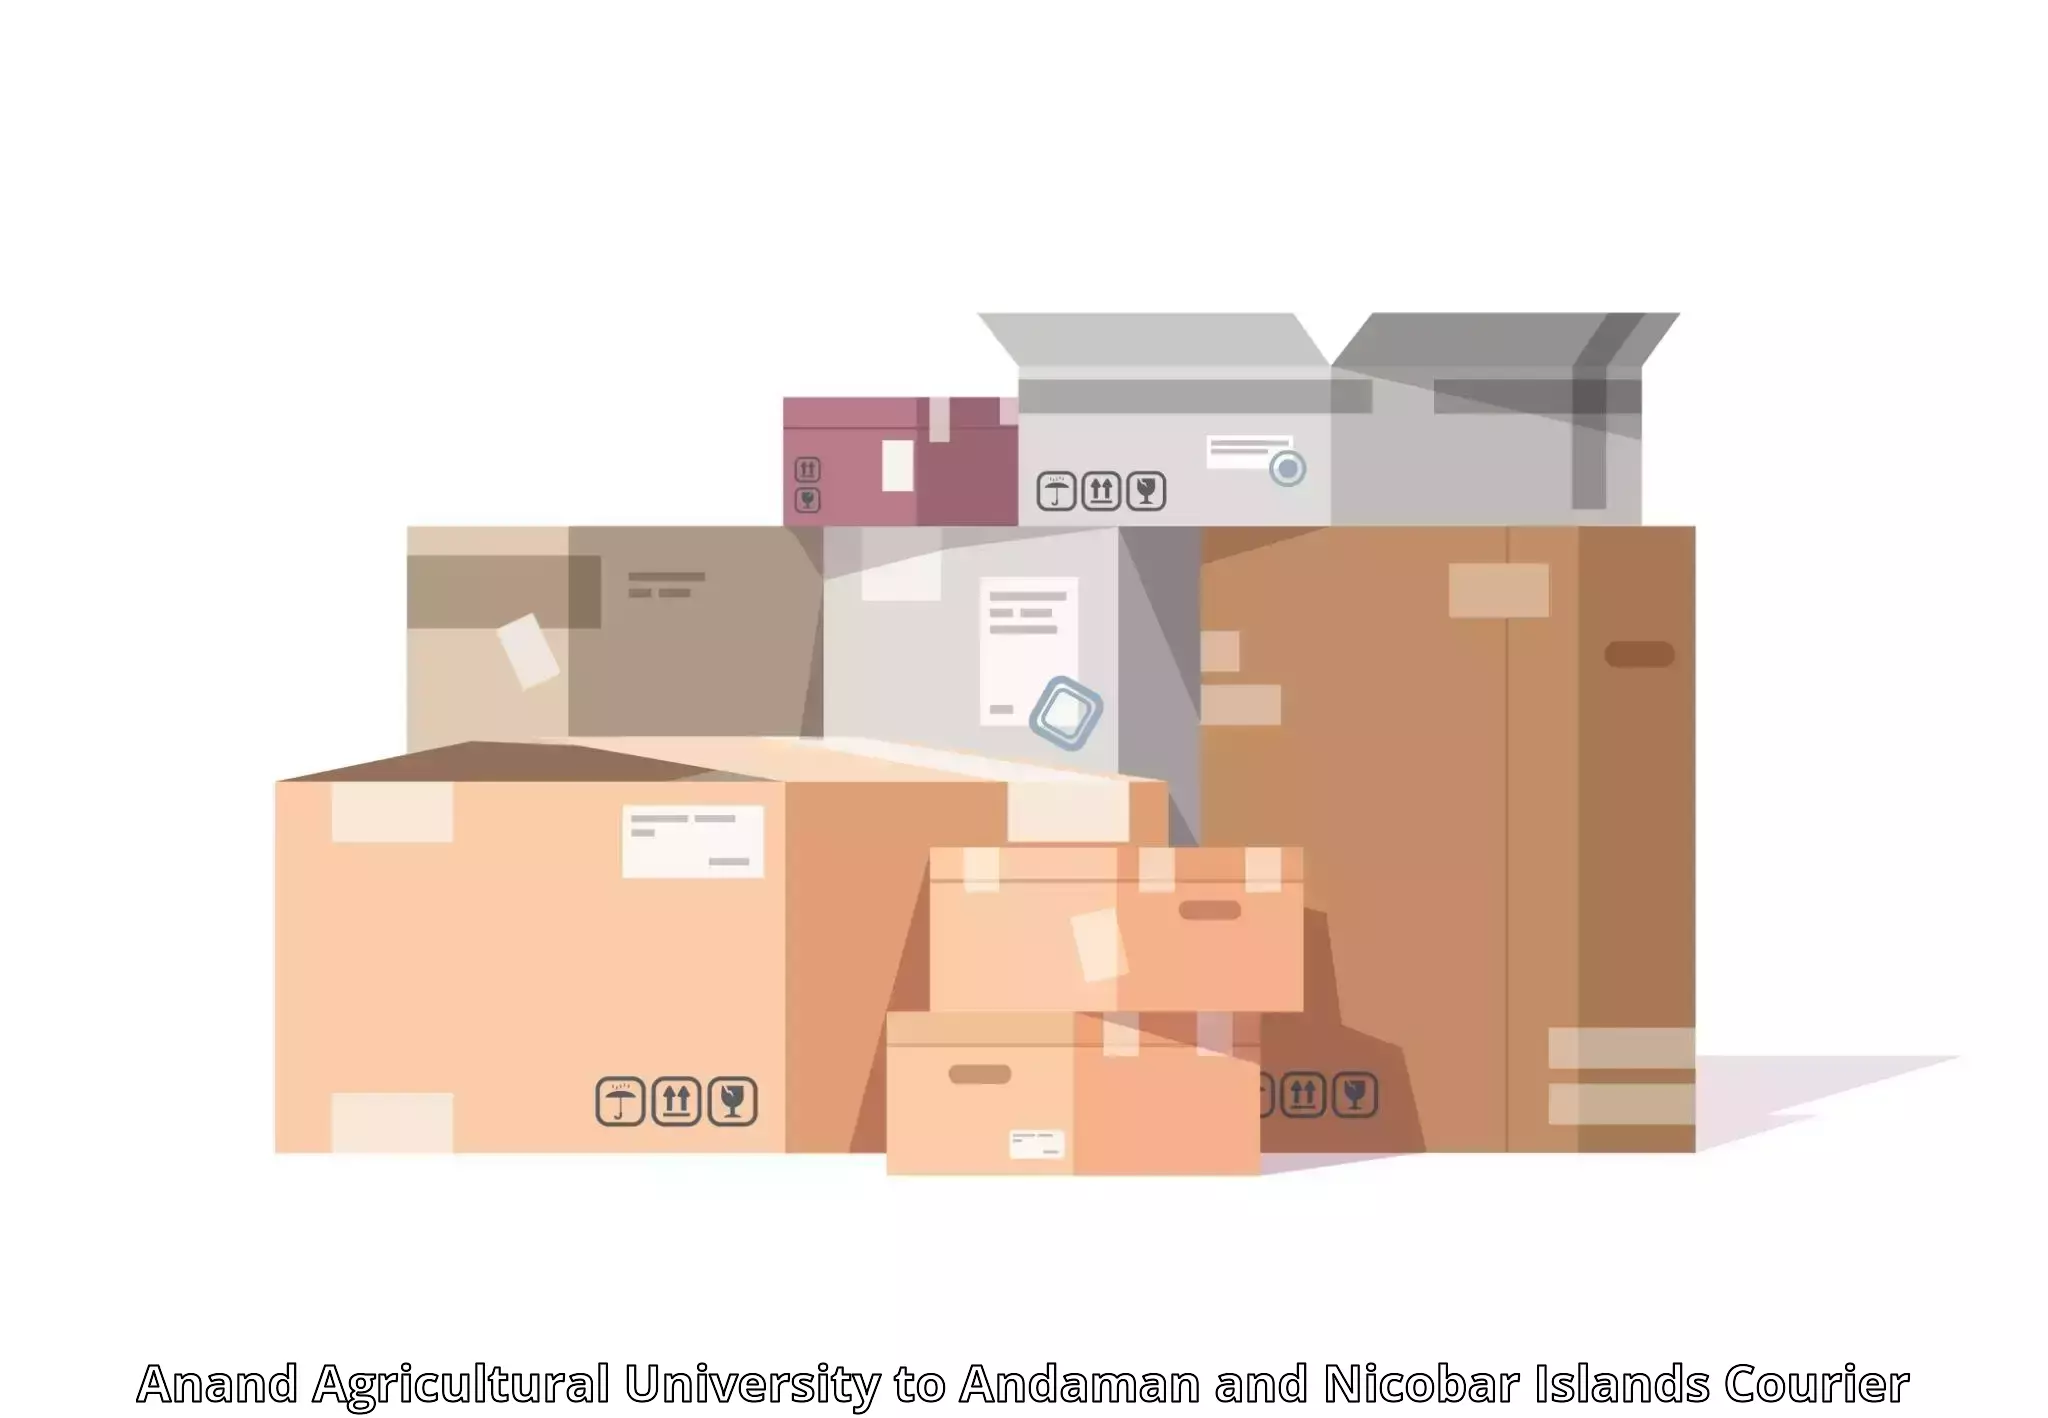 Seamless shipping service Anand Agricultural University to Andaman and Nicobar Islands